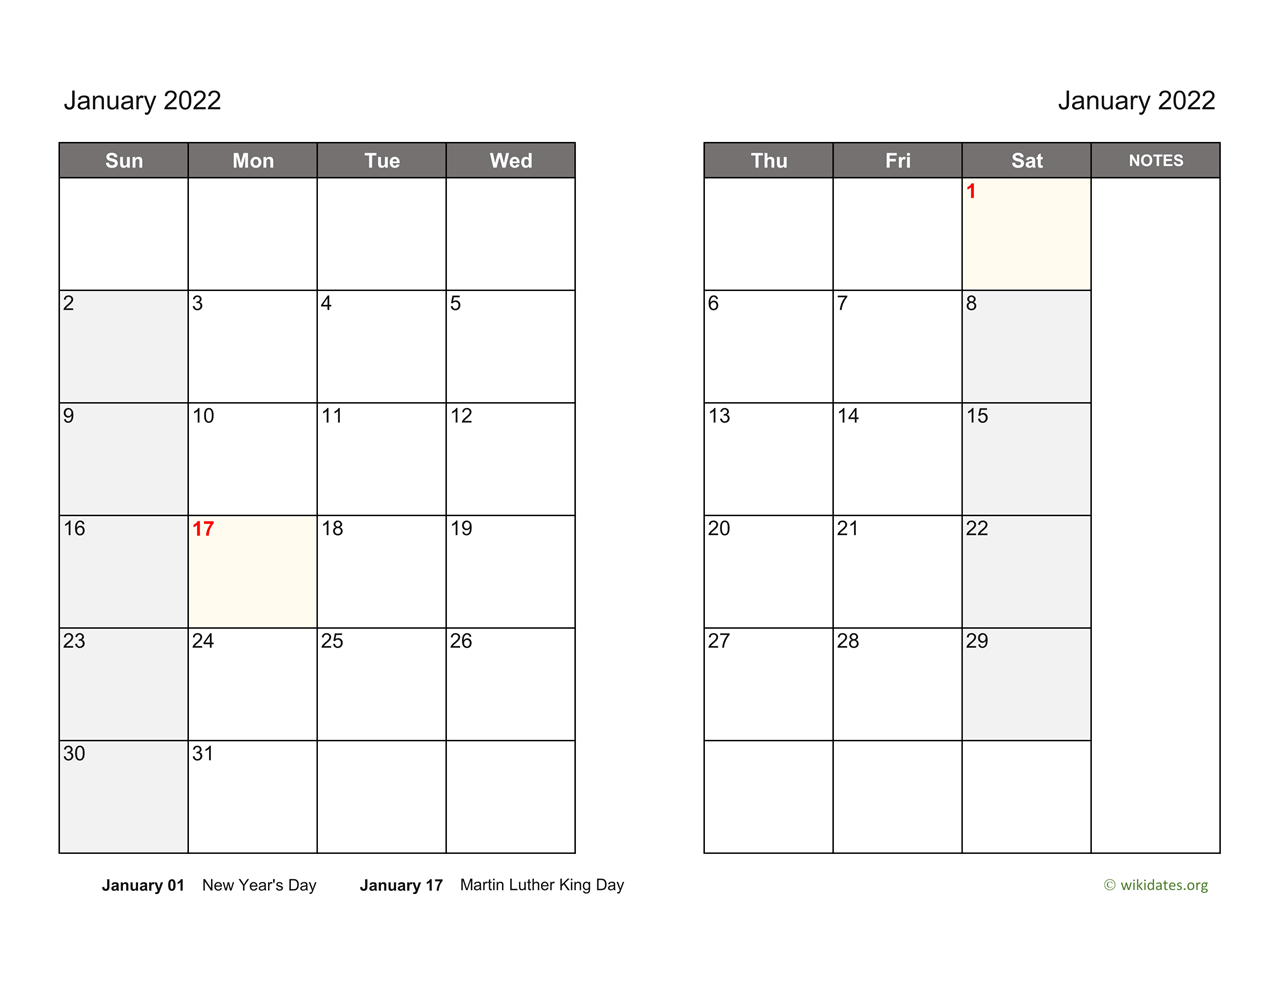 January 2022 Calendar On Two Pages Wikidates Org